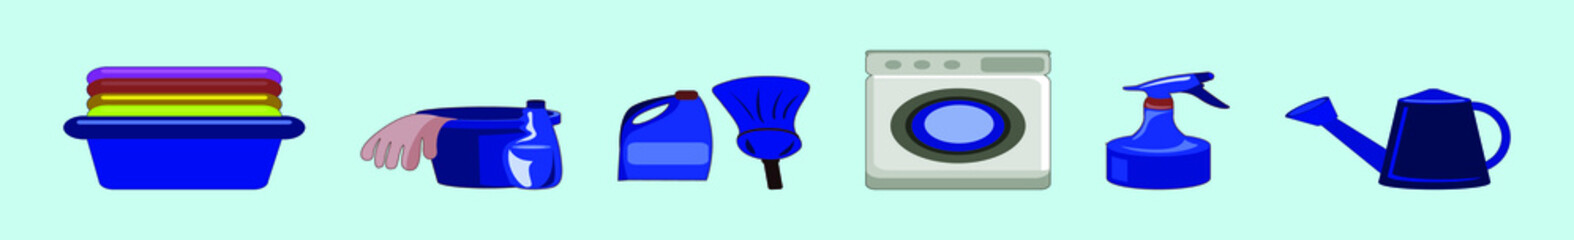 set of cleaning tools cartoon icon design template with various models. vector illustration isolated on blue background